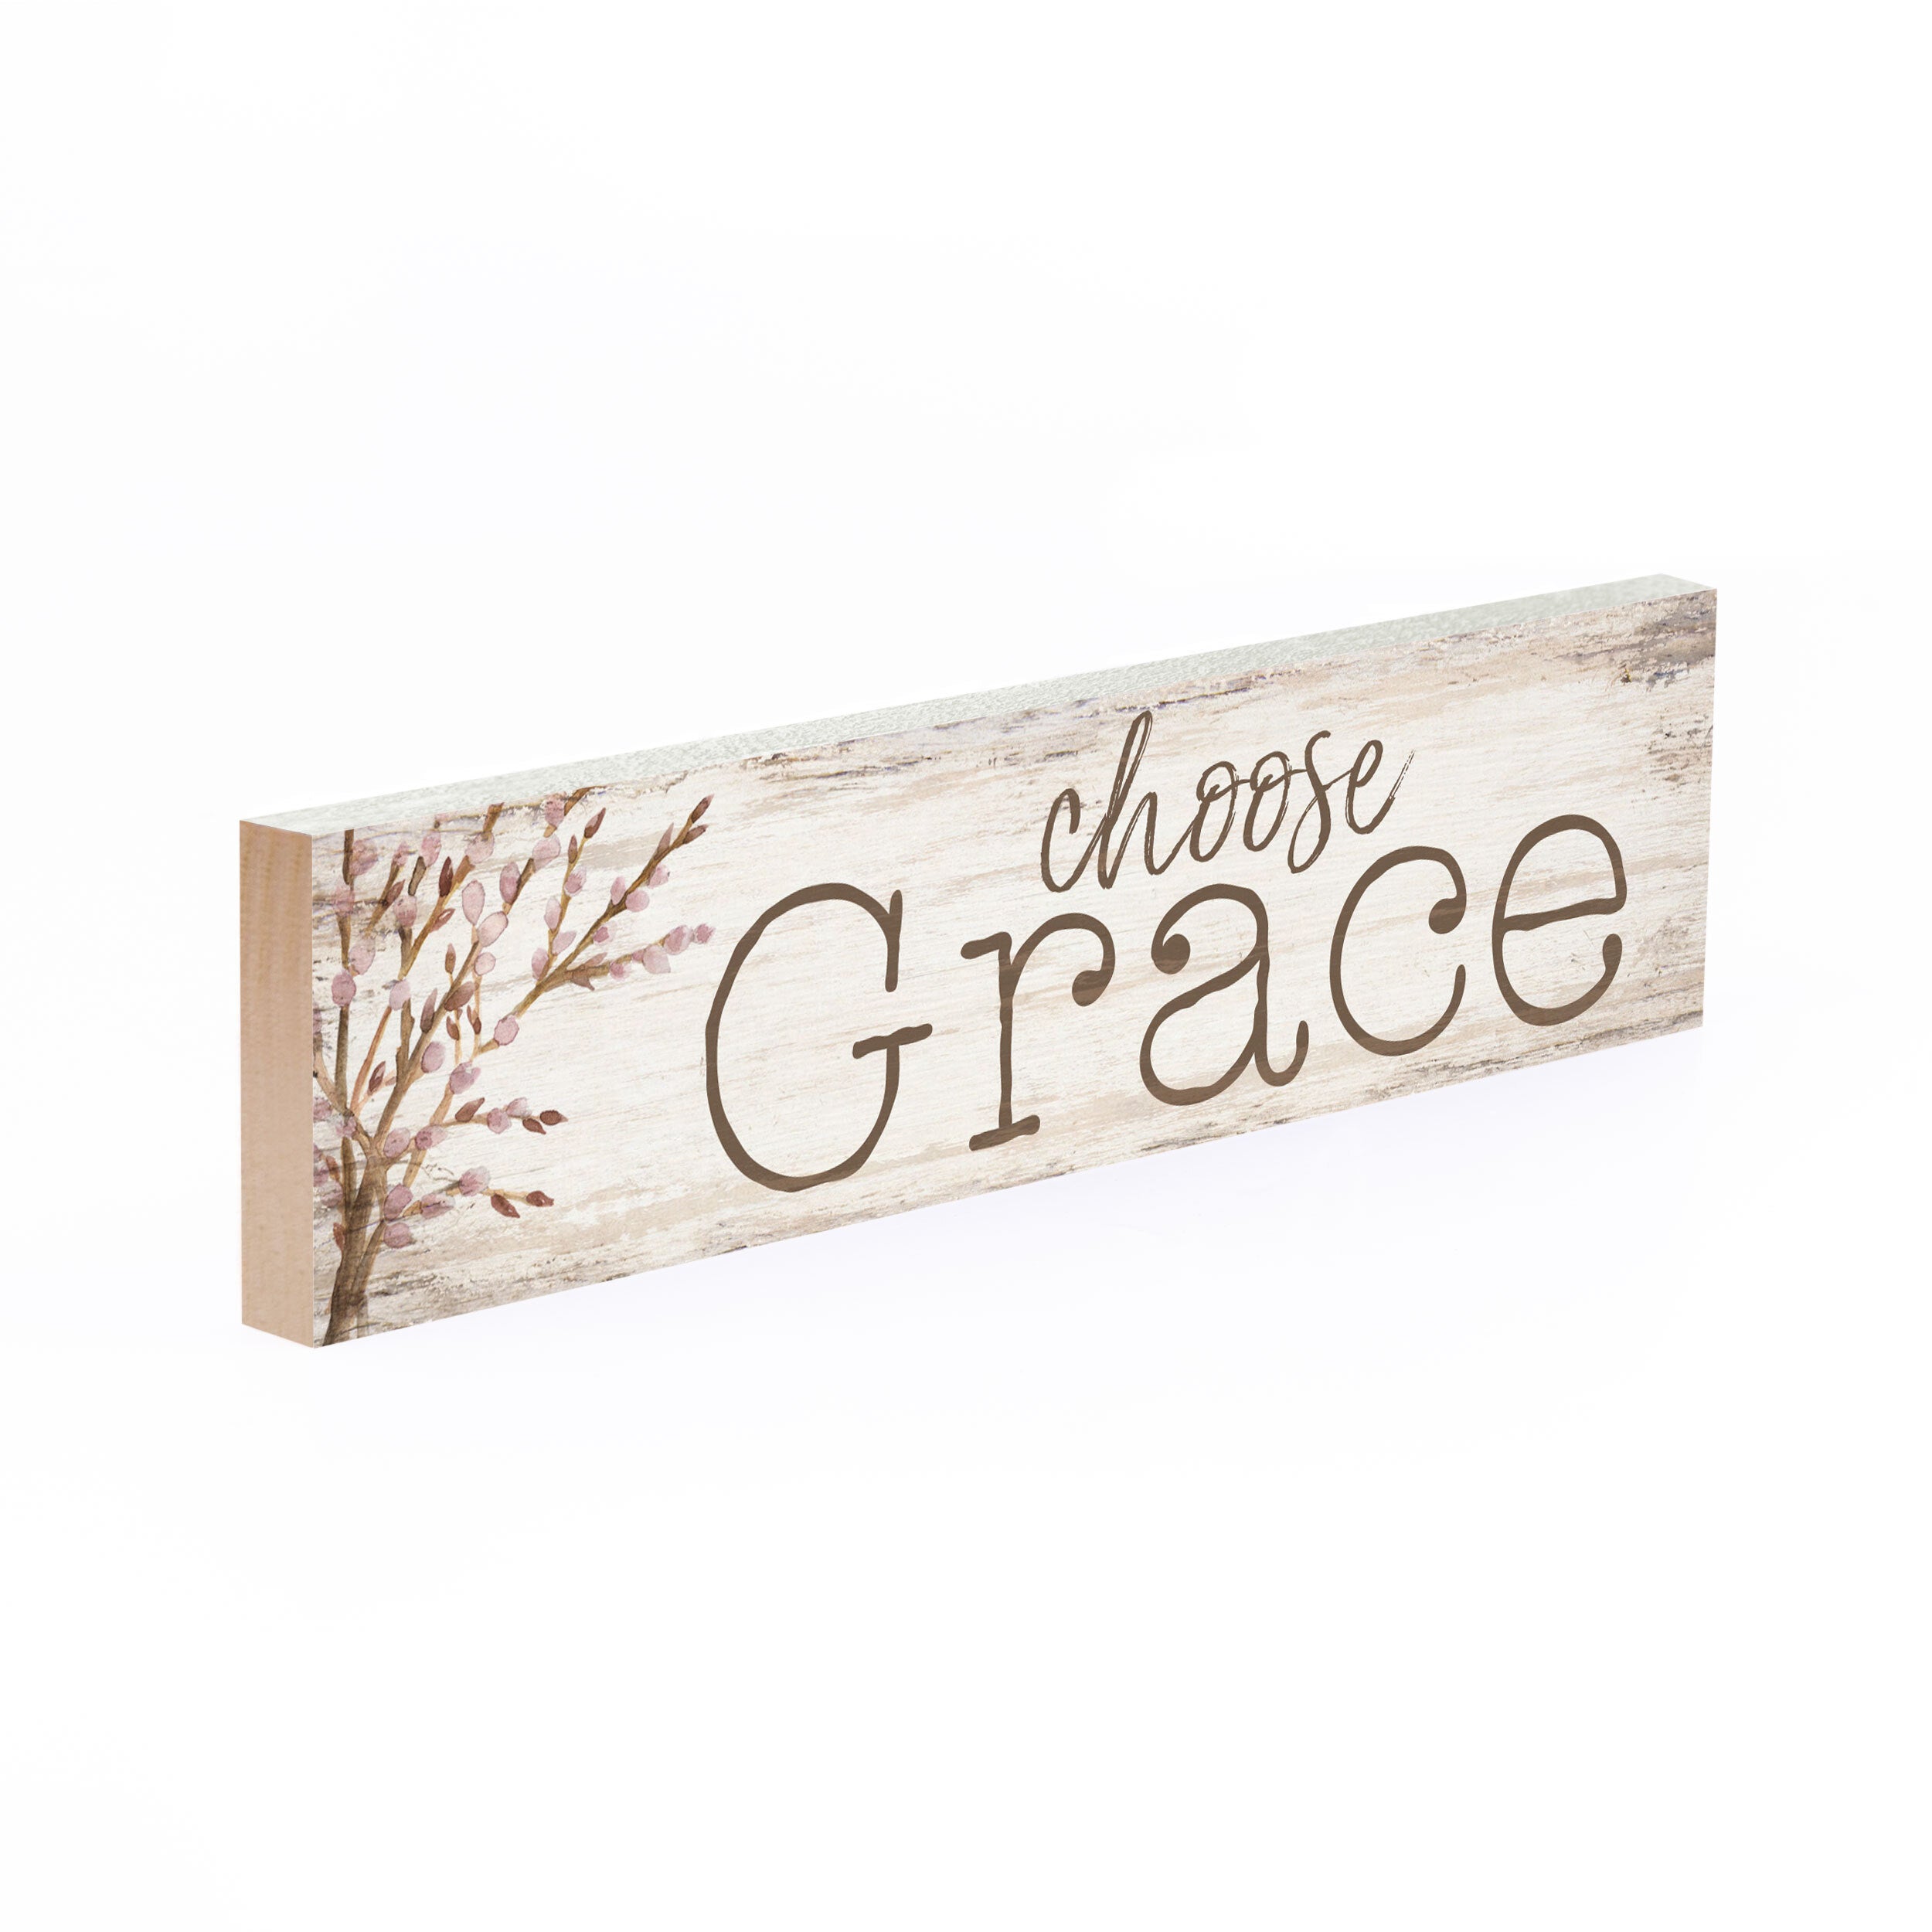 Choose Grace Small Sign